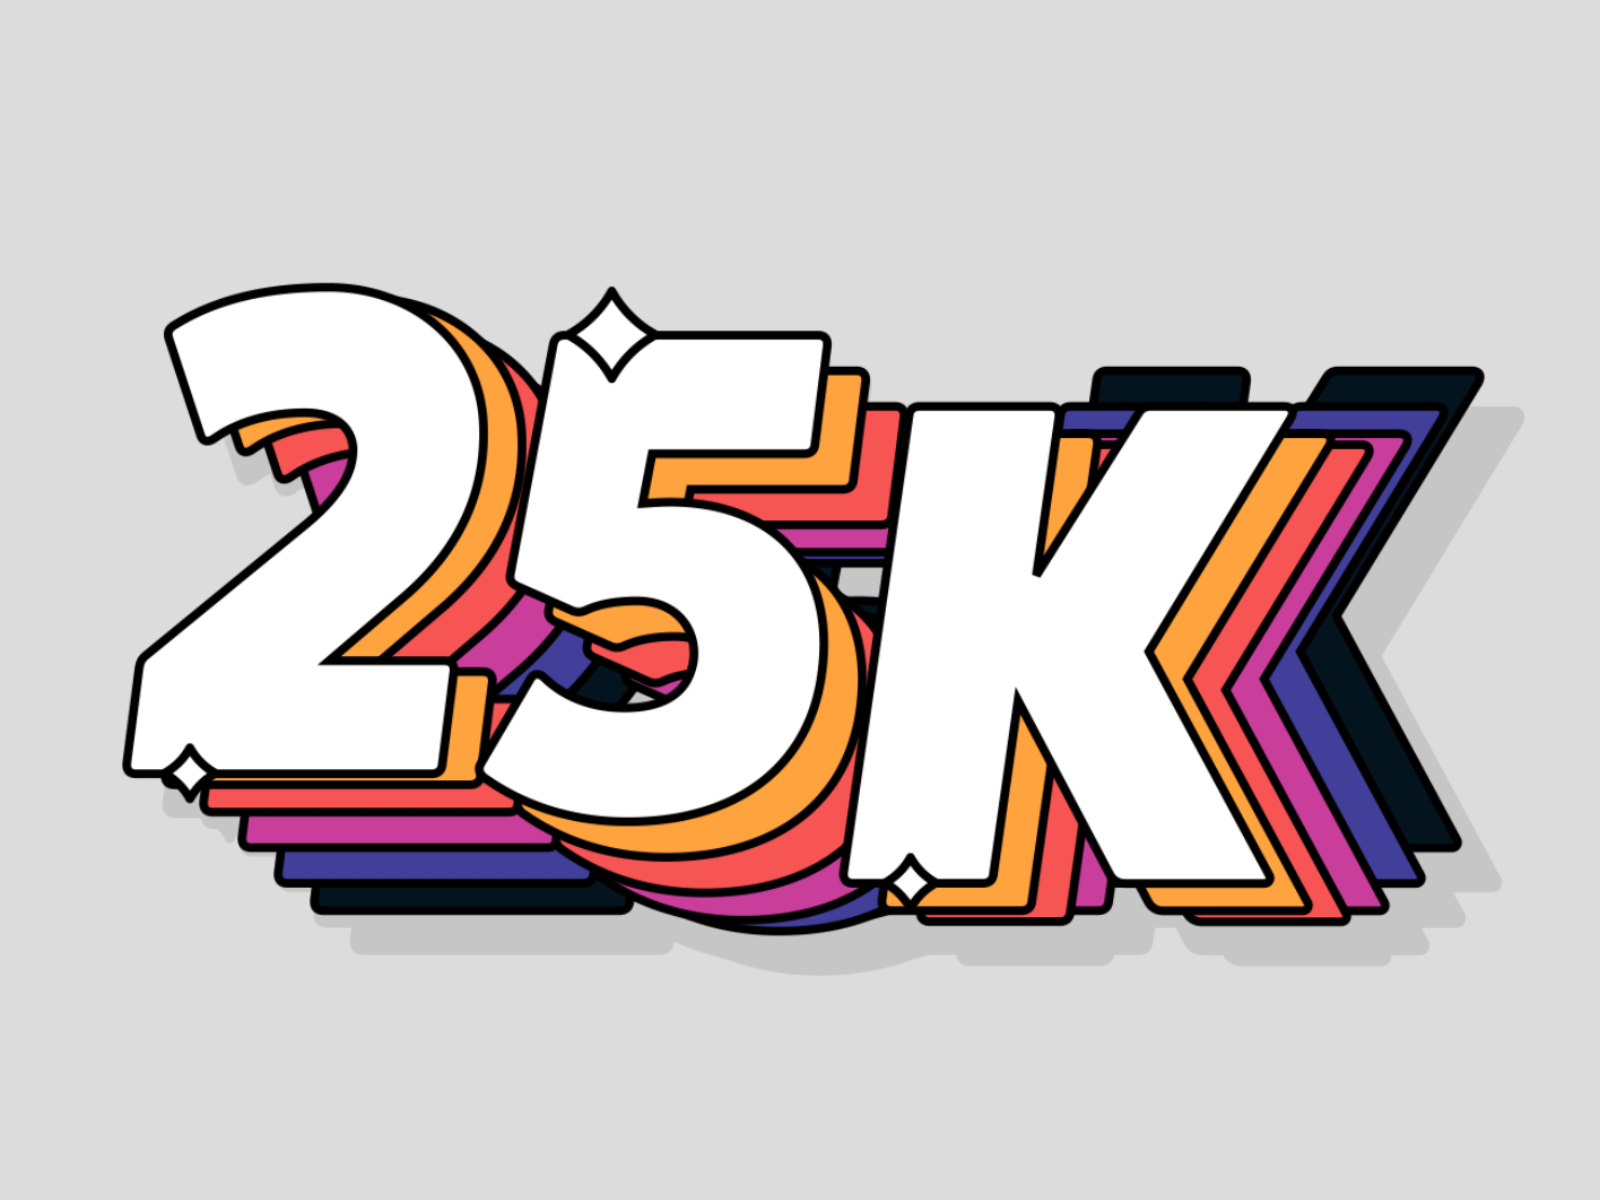 25k animation character icon illustration kinetic typography logo loop motion shadow simple typography